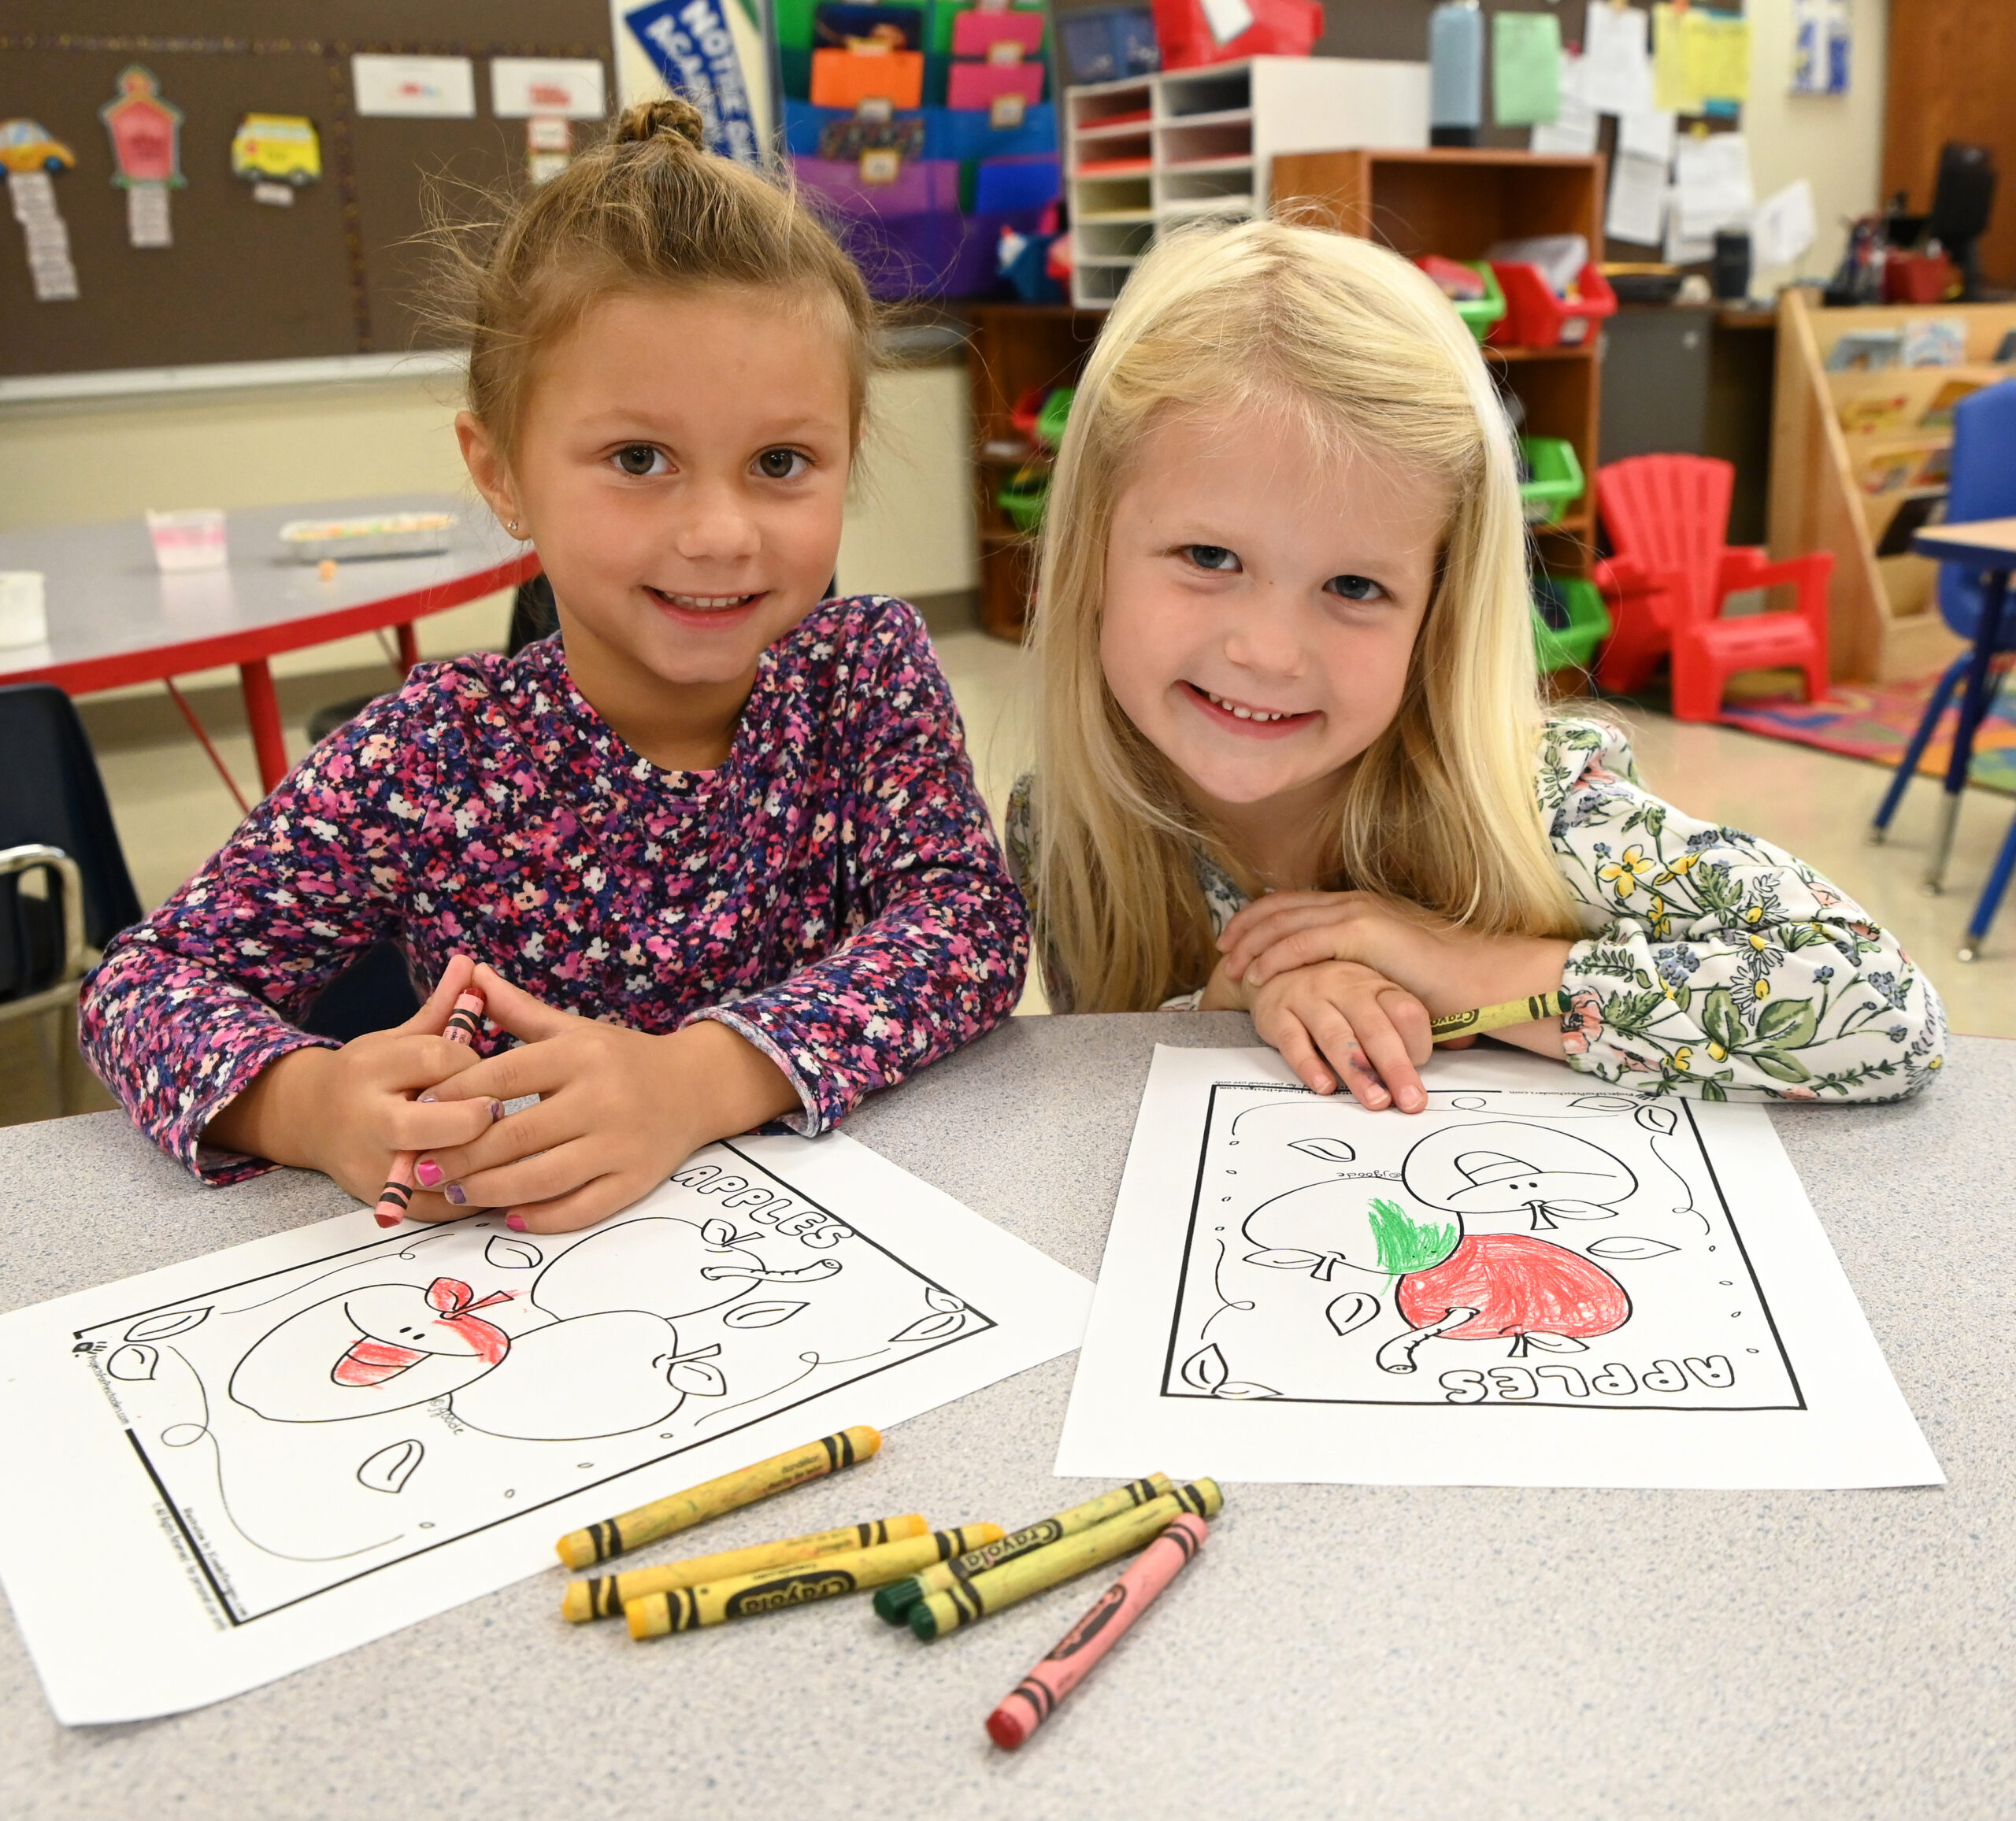 Two students work on coloring at Holy Cross School which is located near the Red Smith neighborhood.